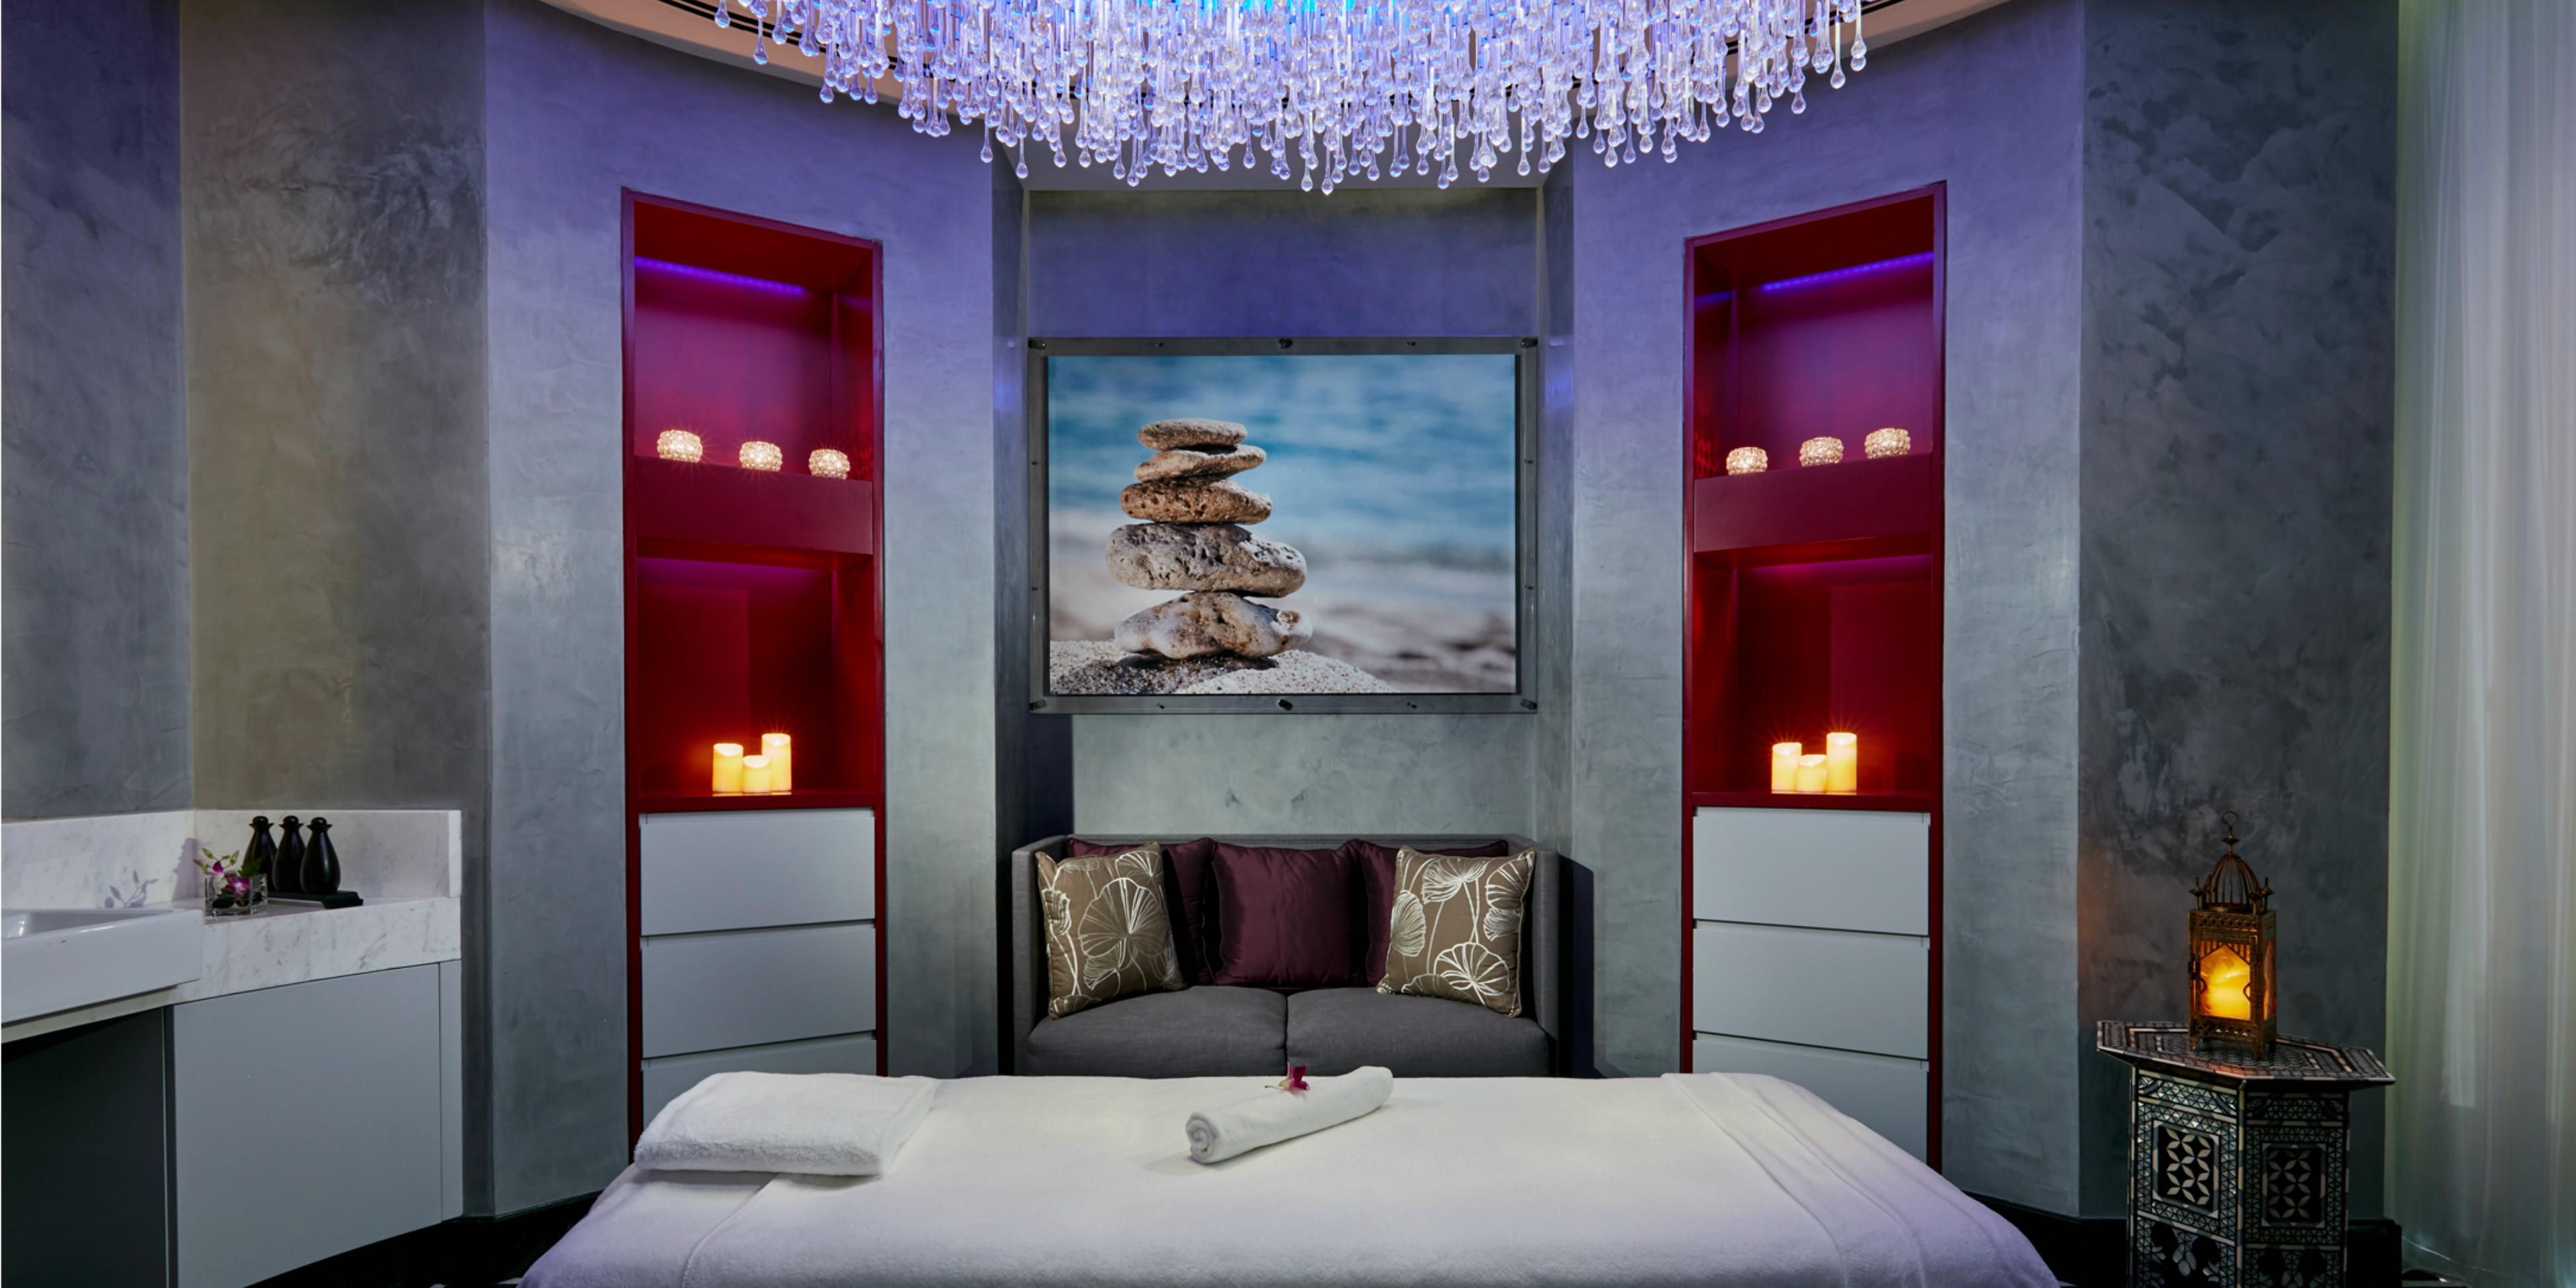 Escape into the luxurious haven of Spa InterContinental, featuring 16 treatment rooms and suites, private indoor pool, Jacuzzi, sauna, and steam facilities. After your treatment, head to the Spa's separate relaxation rooms to unwind. 